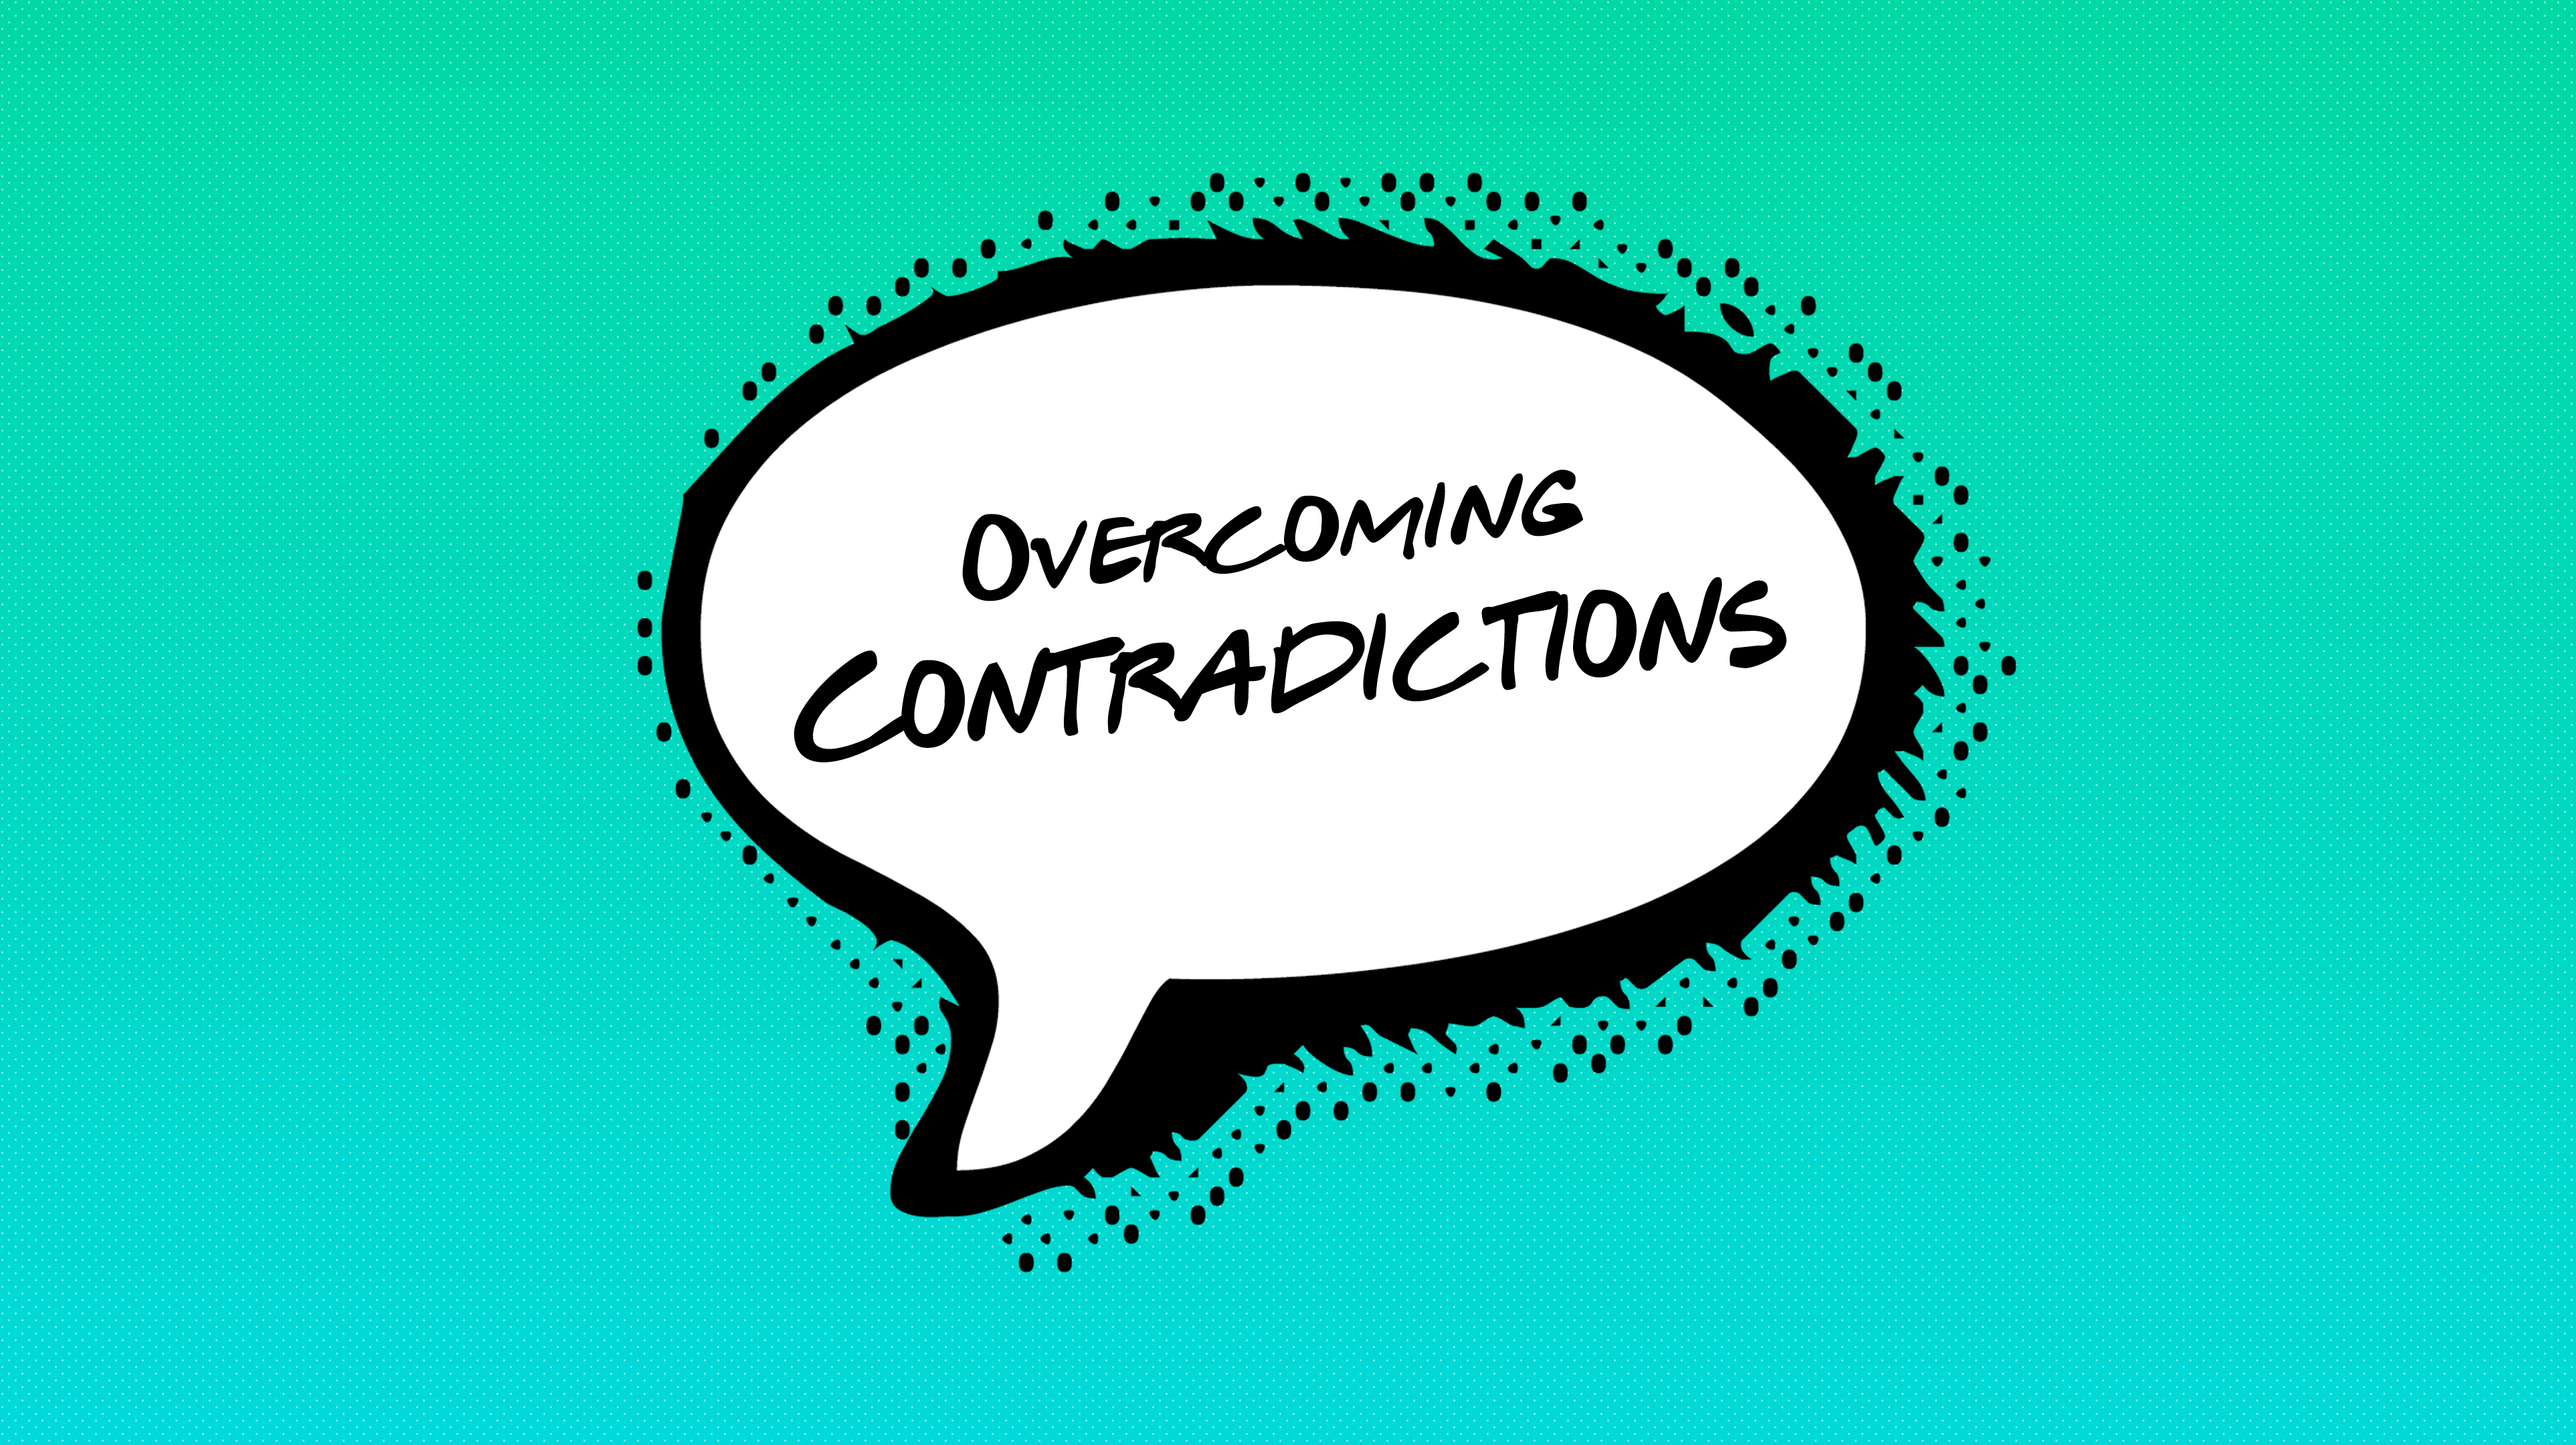 Overcoming Contradictions